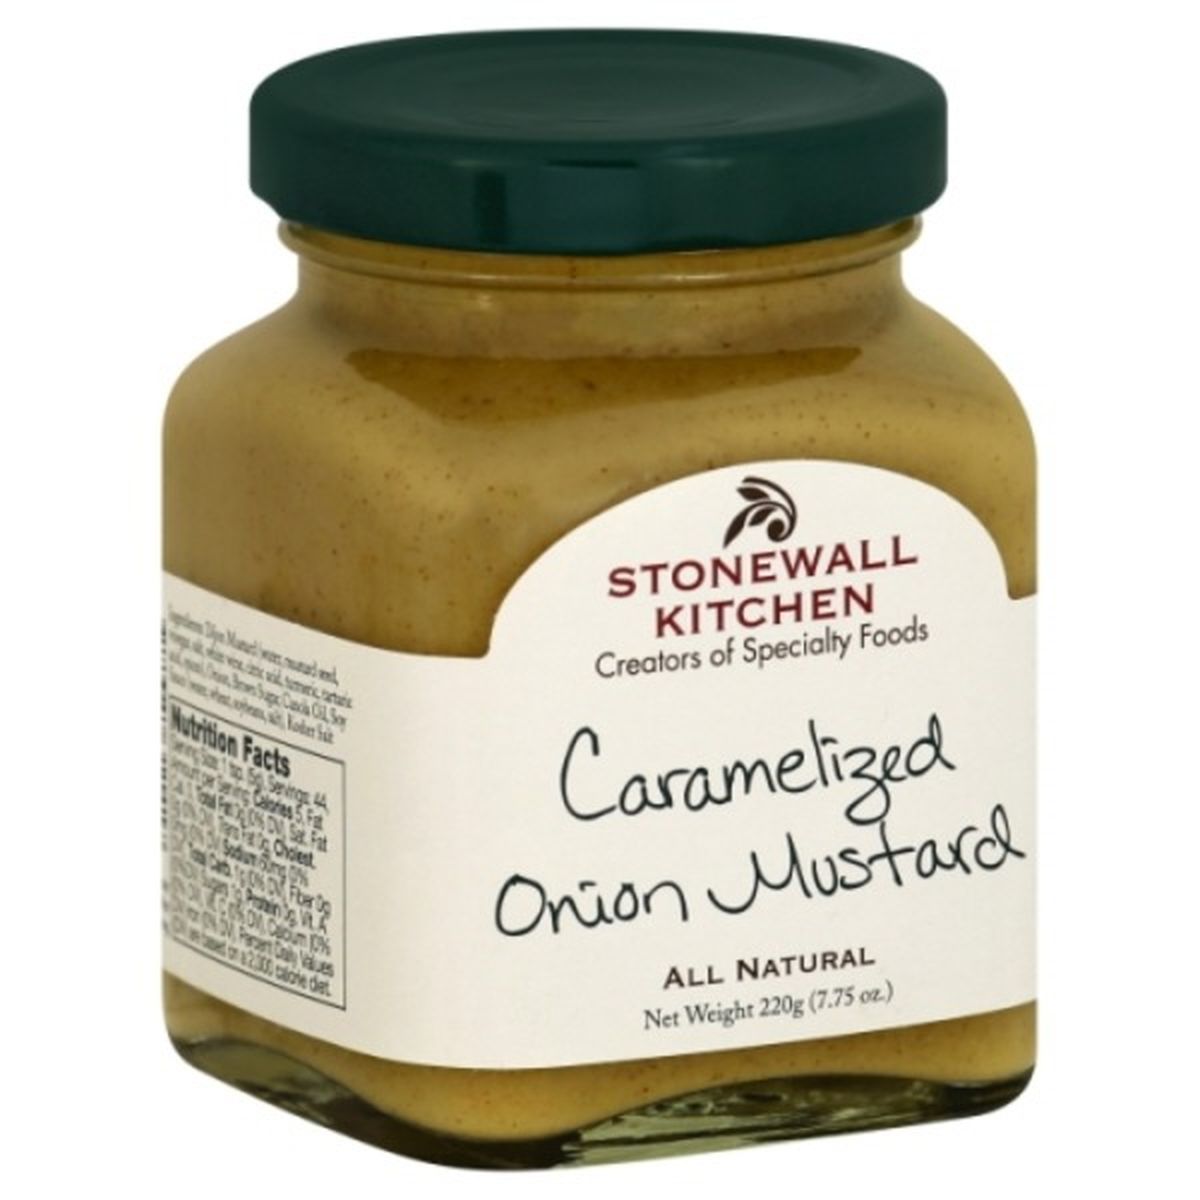 Calories in Stonewall Kitchen Mustard, Caramelized Onion